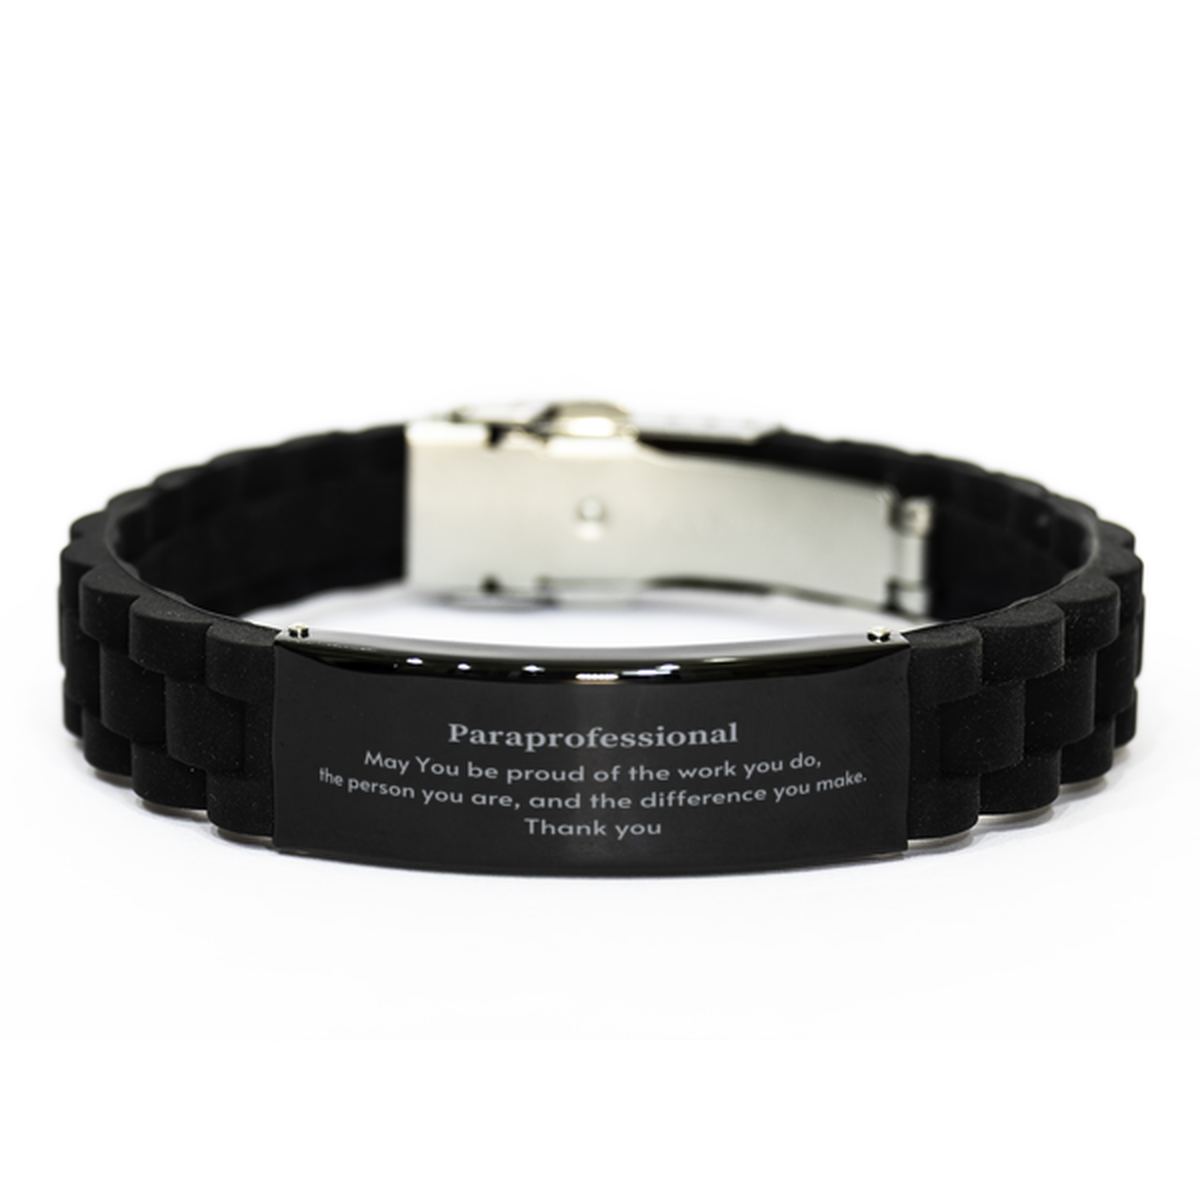 Heartwarming Black Glidelock Clasp Bracelet Retirement Coworkers Gifts for Paraprofessional, Paraprofessional May You be proud of the work you do, the person you are Gifts for Boss Men Women Friends